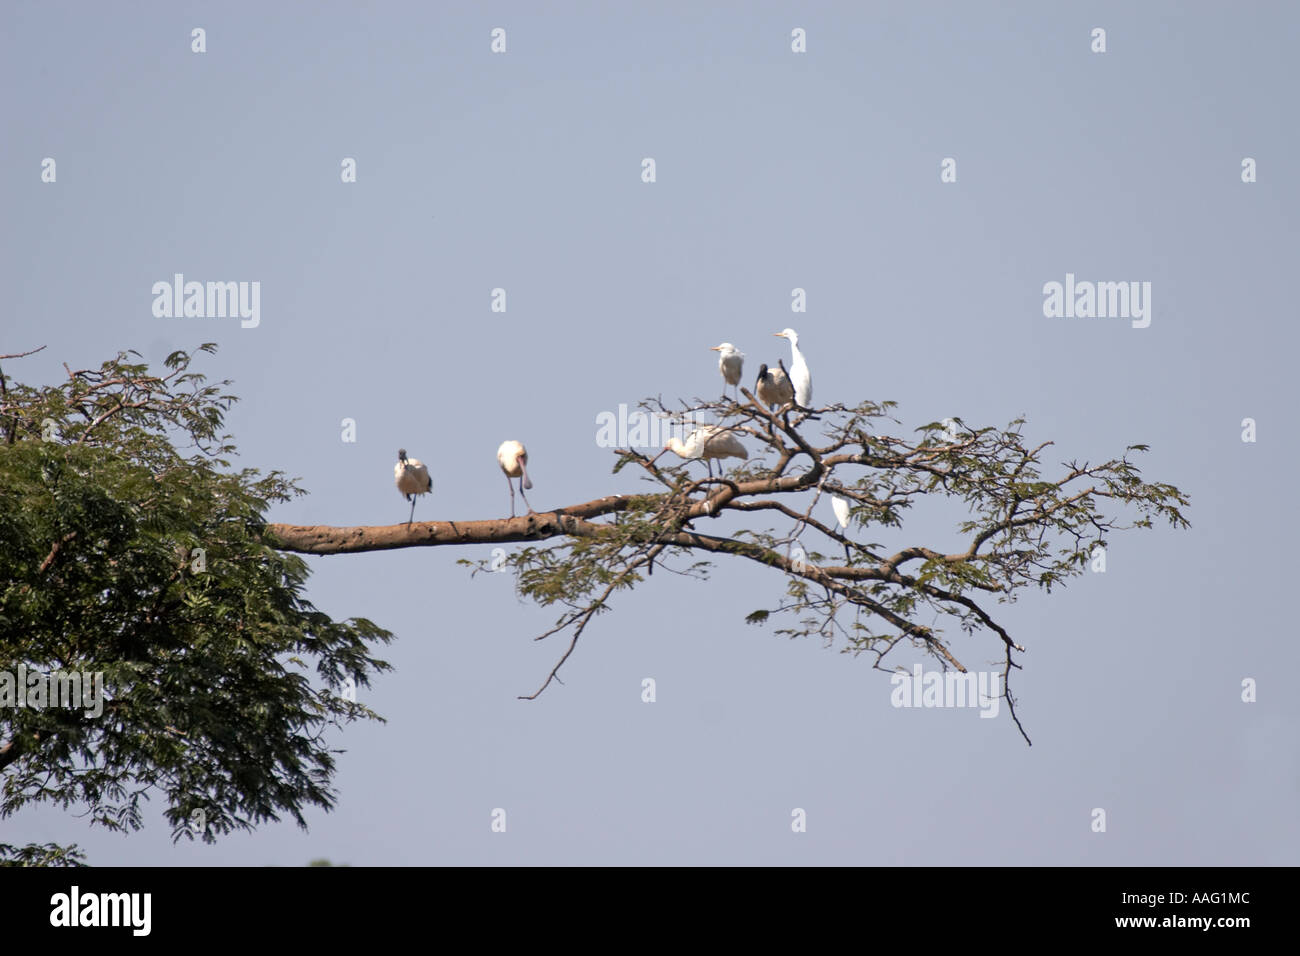 Sacred ibis Spoonbill Cattle egrets in a tree near Kuch Ethiopia Africa Stock Photo